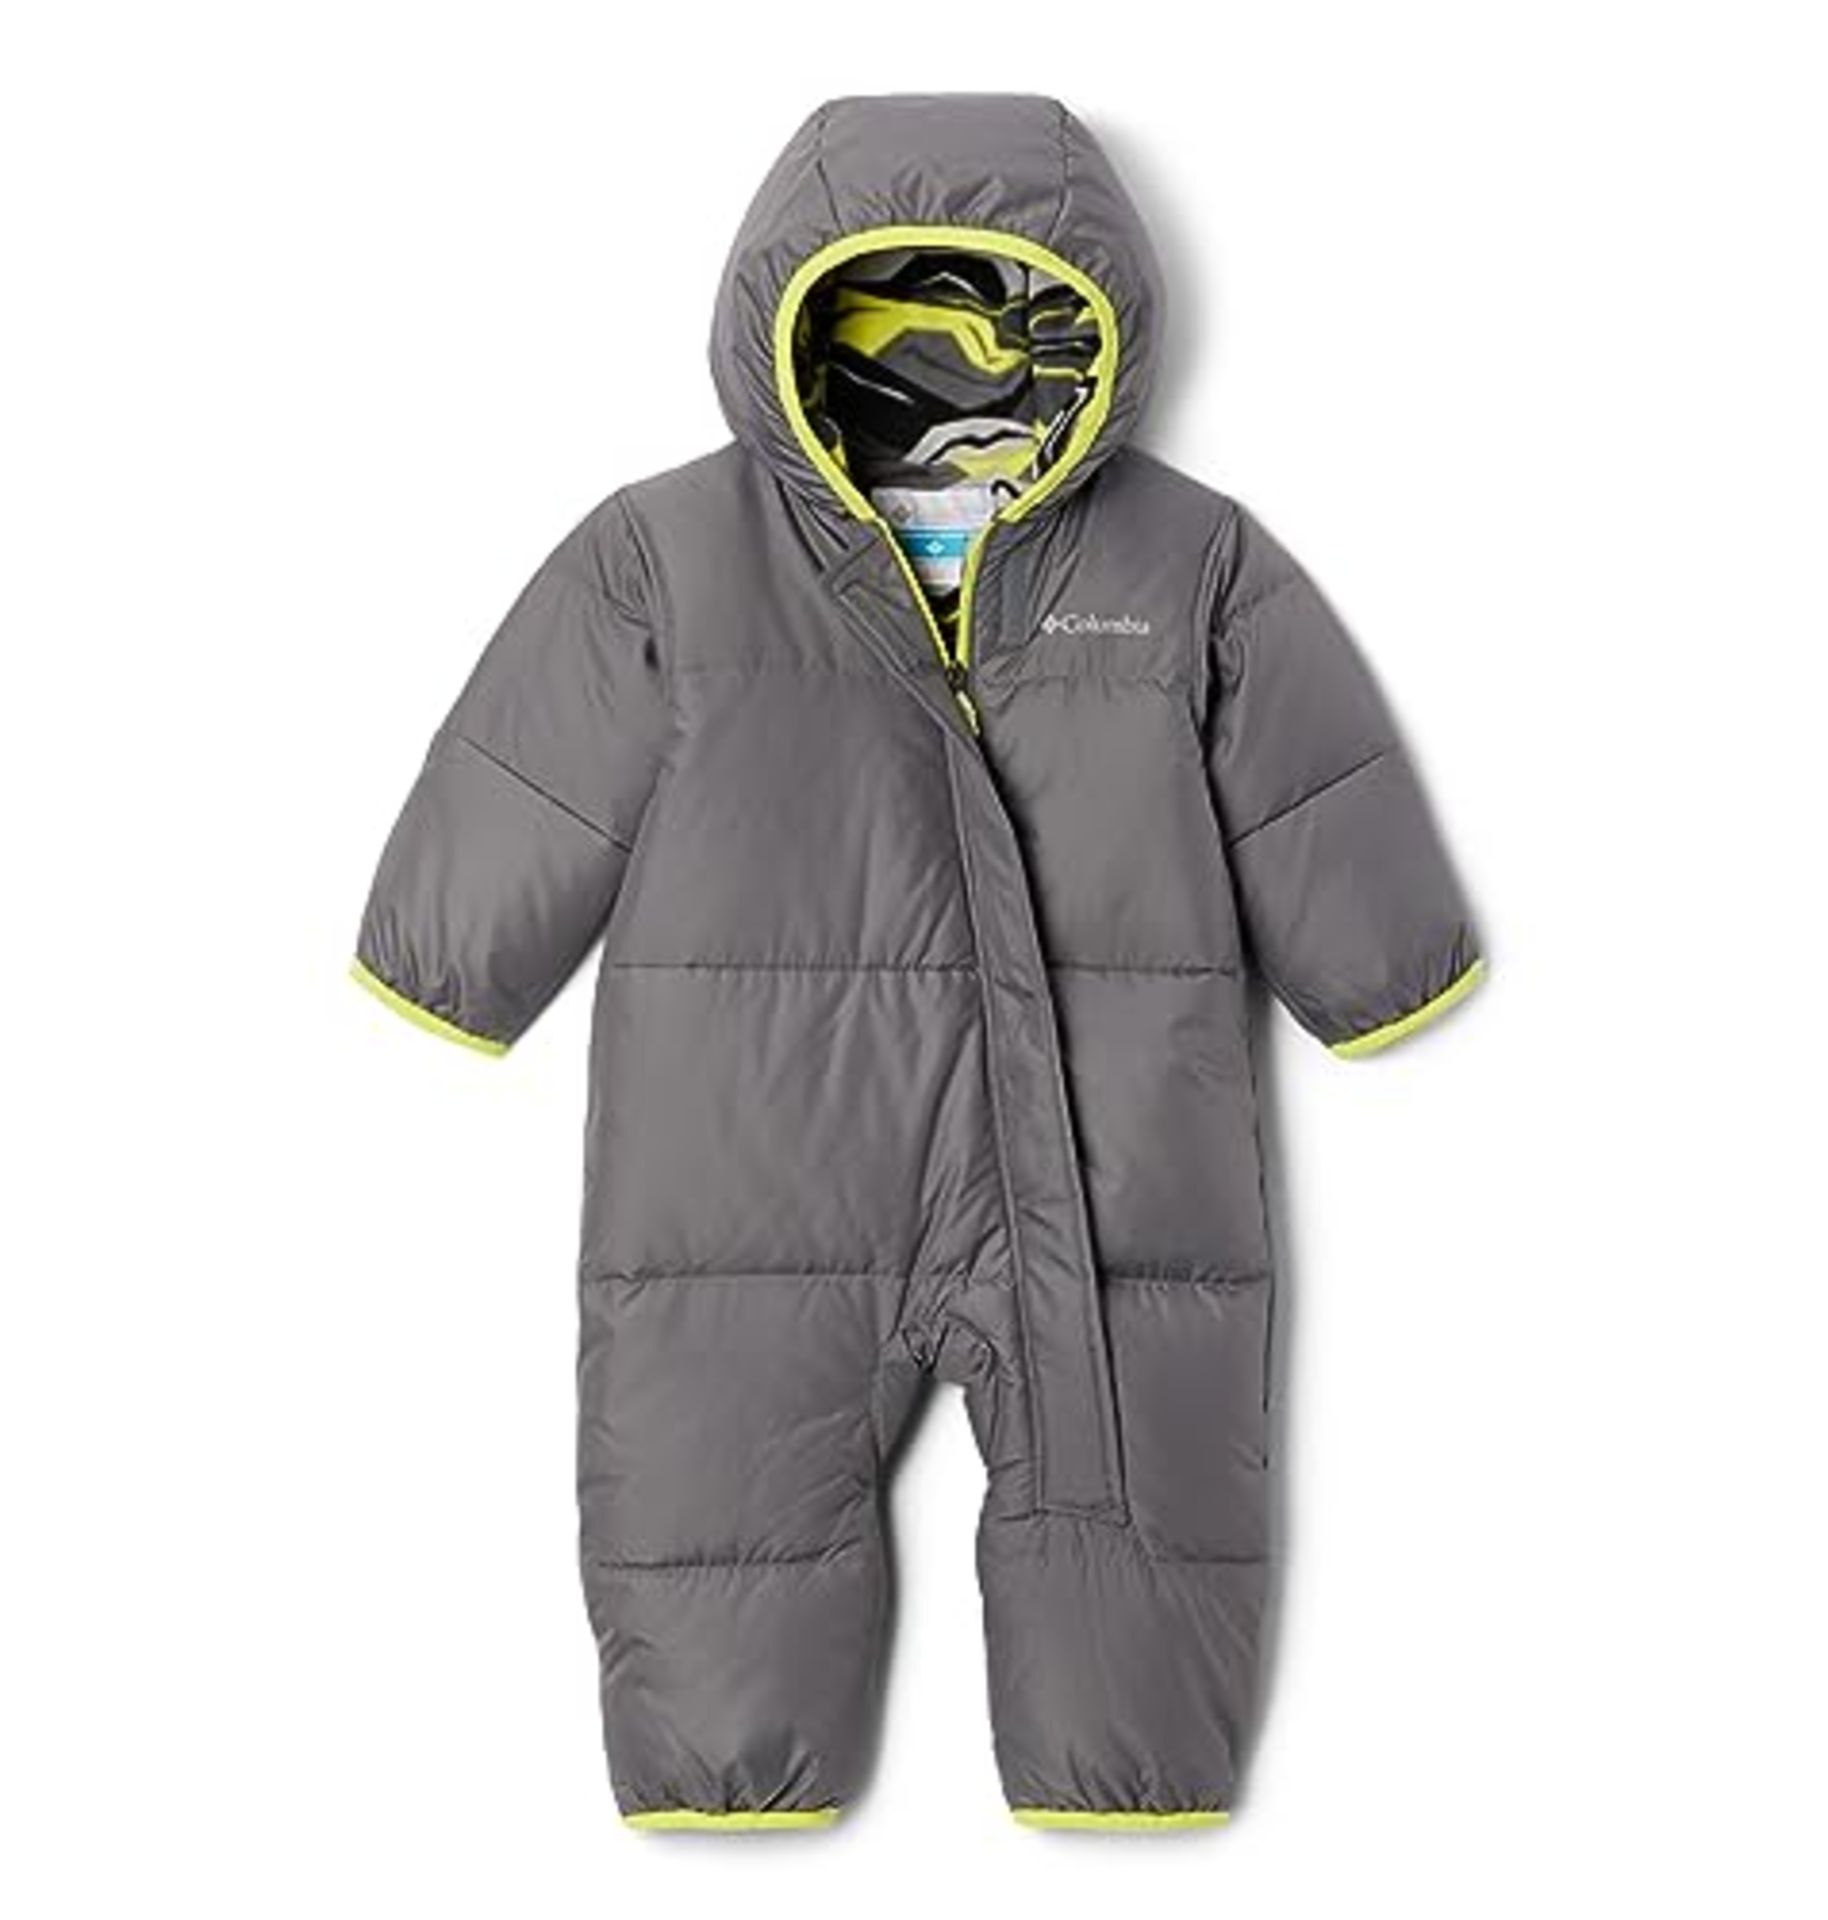 Columbia Unisex Baby Snuggly Bunny Snowsuit Romper 18/24 months